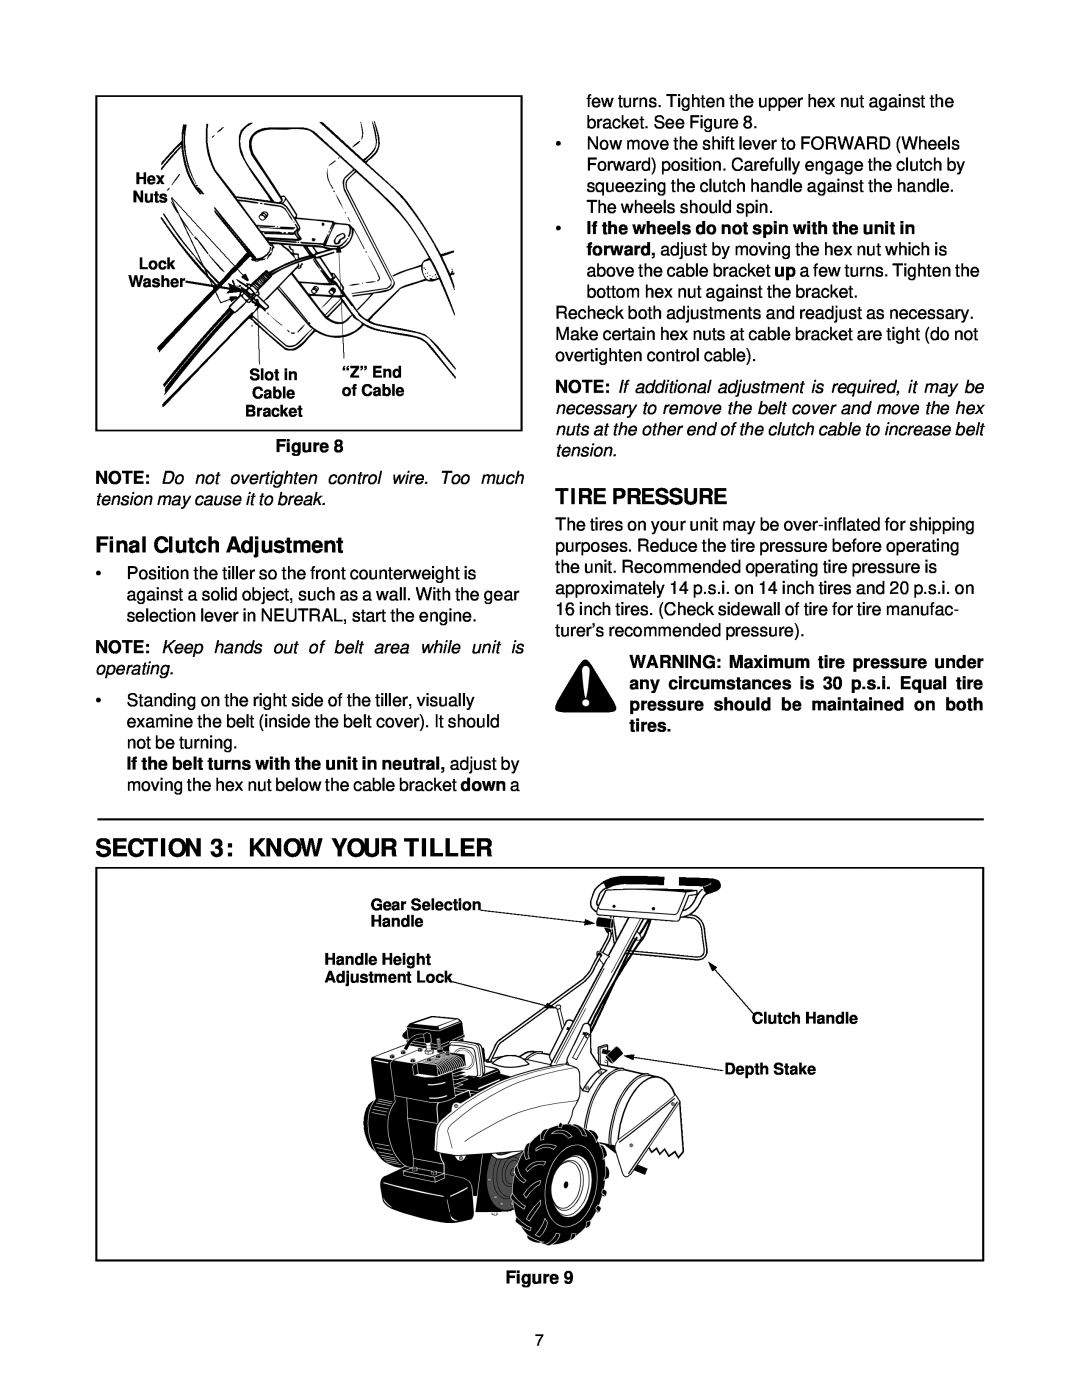 White Outdoor RB-530 manual Know Your Tiller, Final Clutch Adjustment, Tire Pressure 